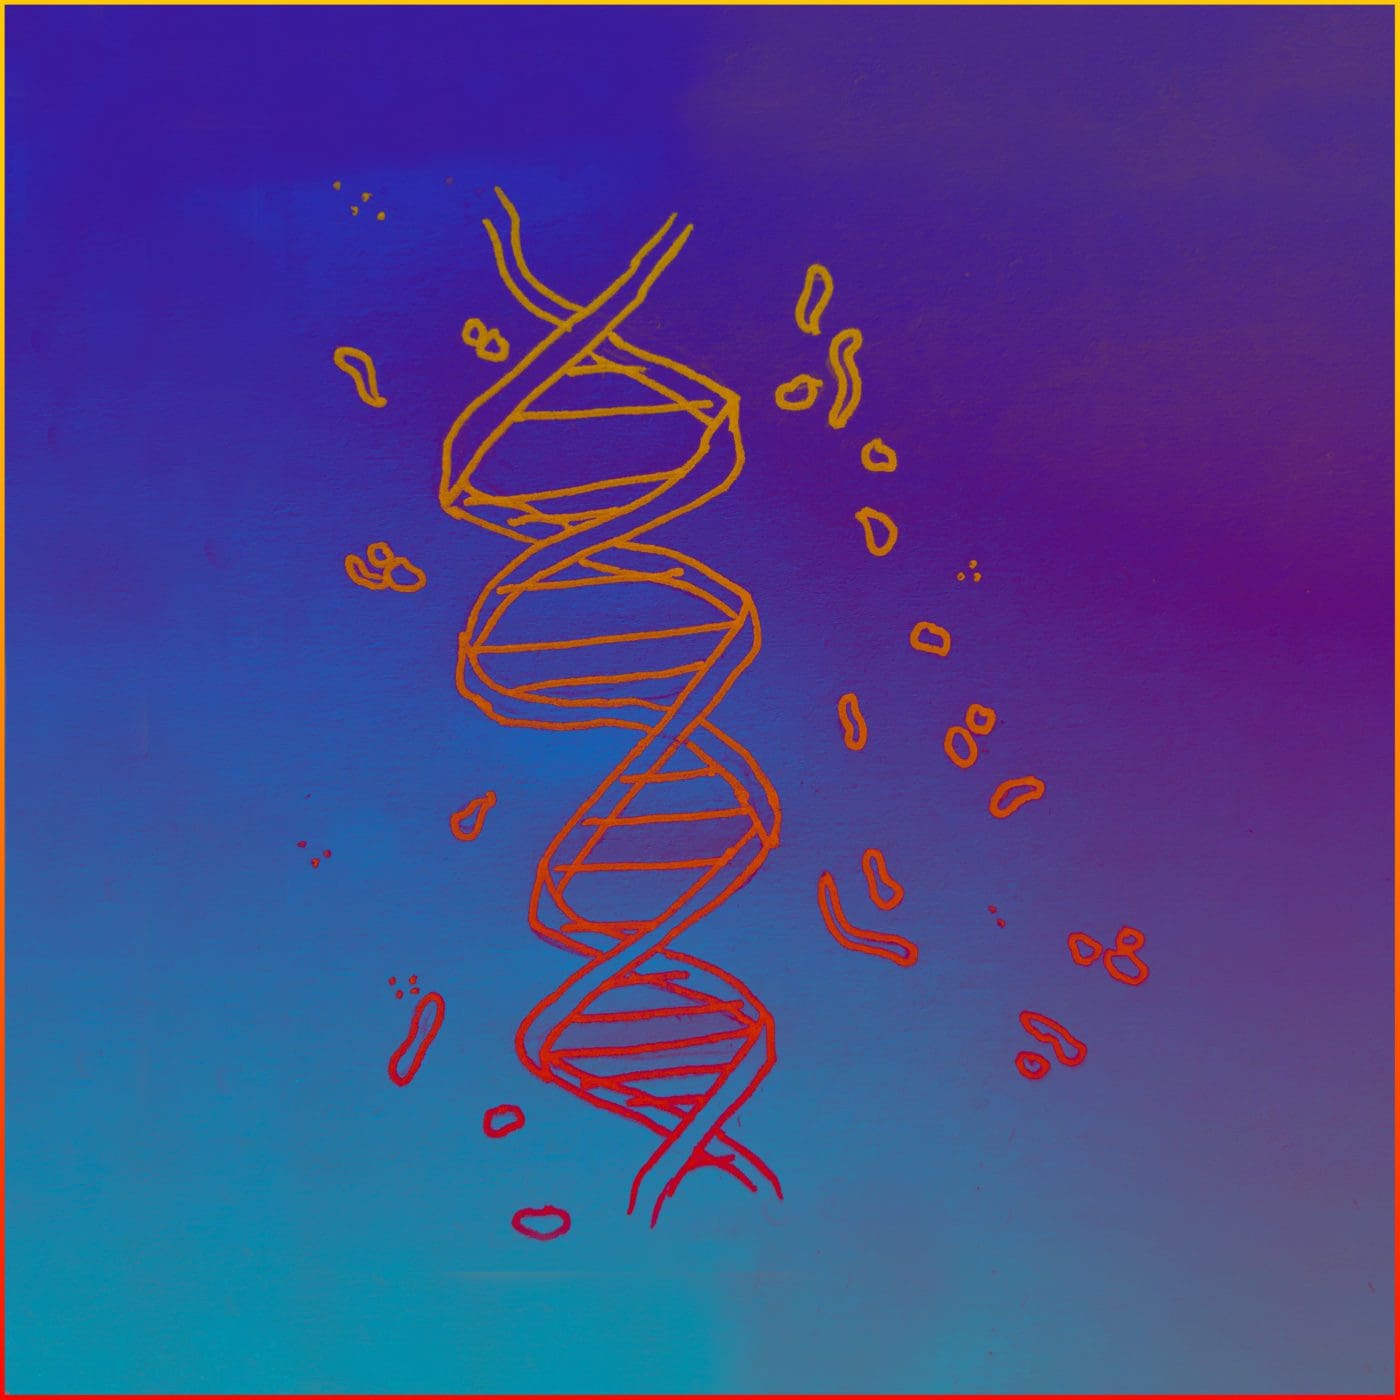 A line drawing of orange on vivid purple depicts a double helix structure formed by double-stranded molecules of DNA. This is surrounded by small cells.